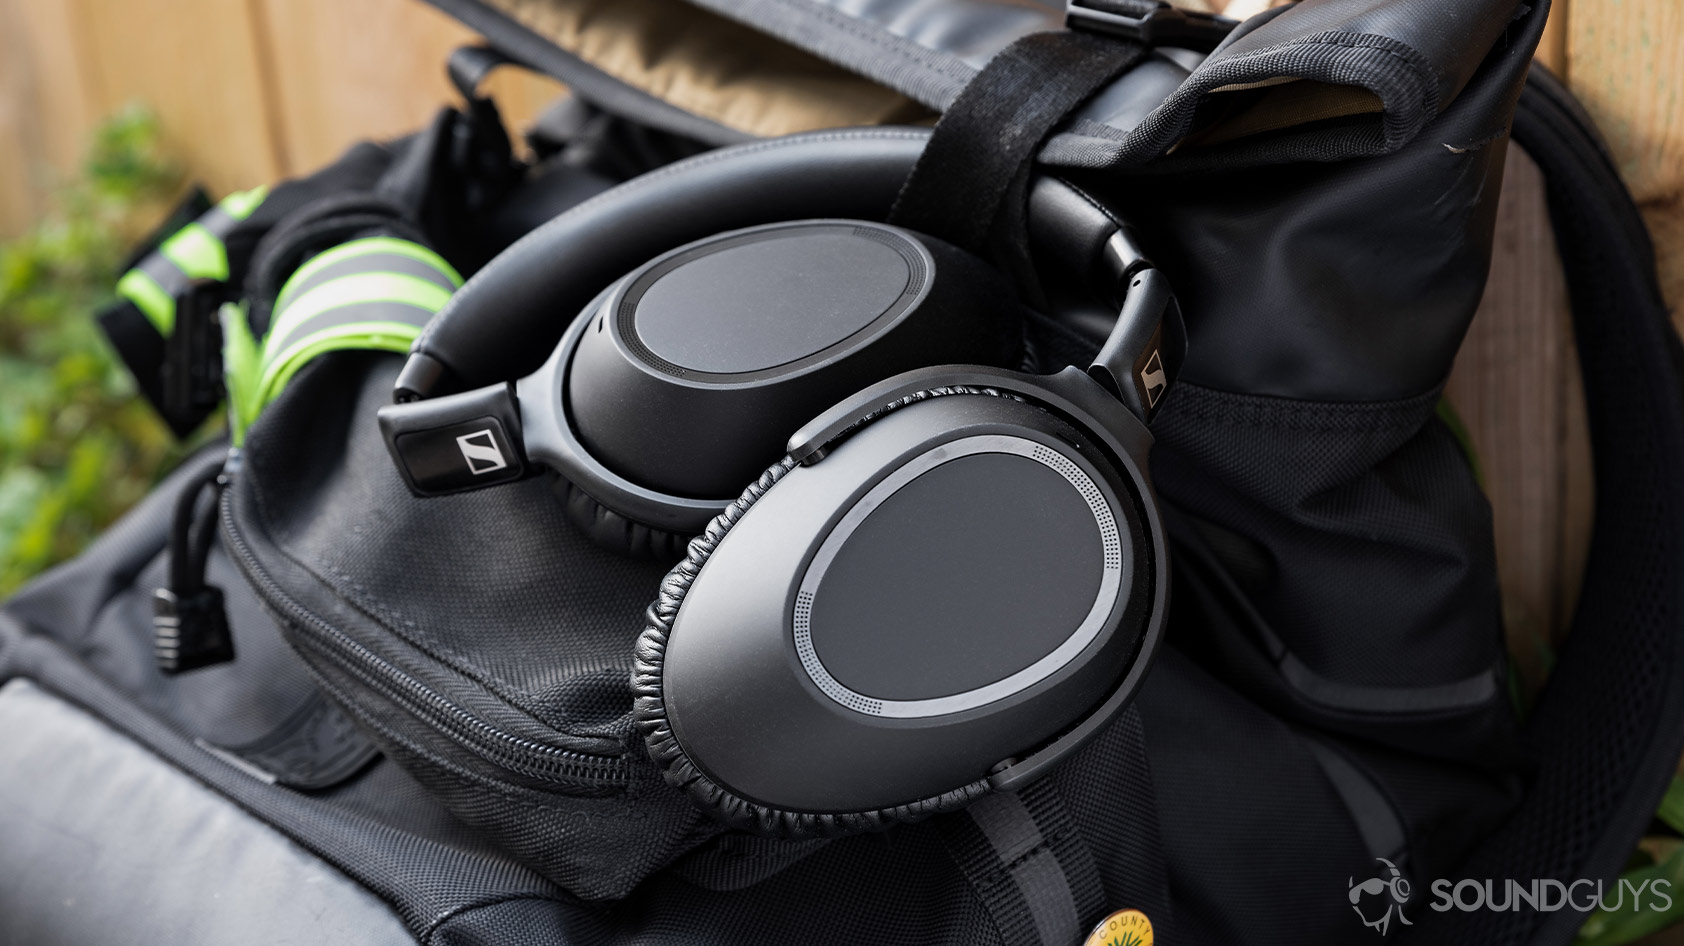 A photo of the Sennheiser PXC 550-II noise canceling headphones folded on the outside of a backpack.